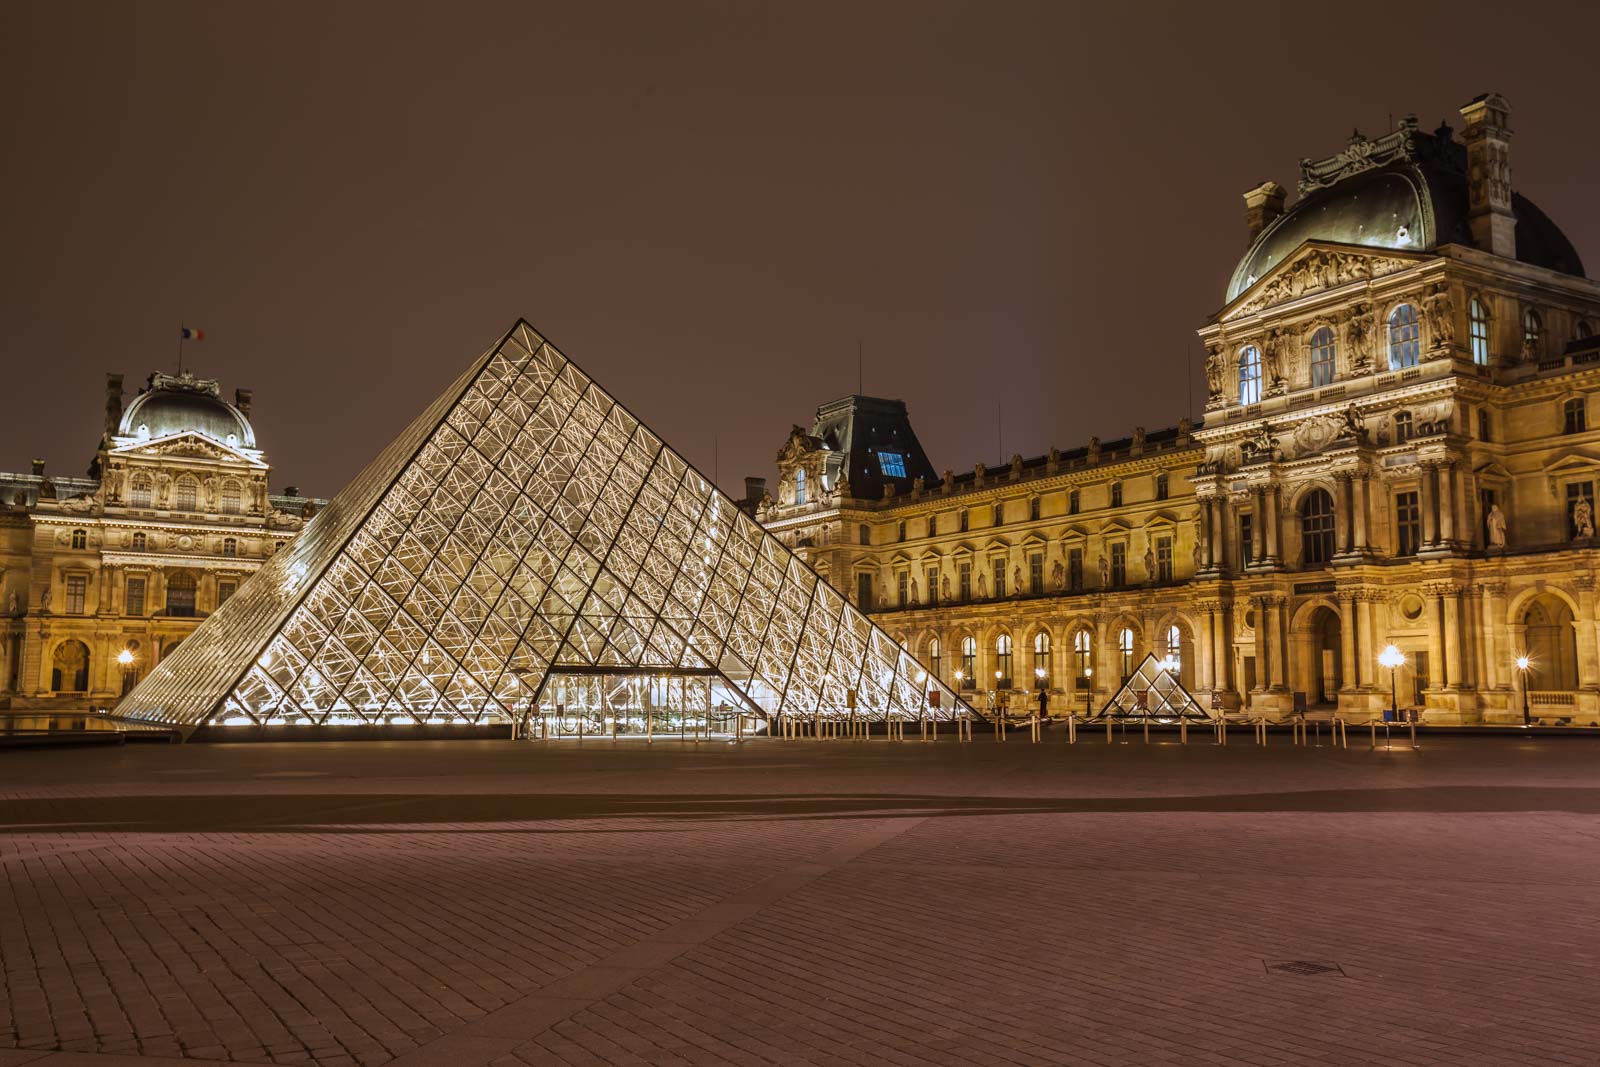 Cost of activities for a trip to Paris